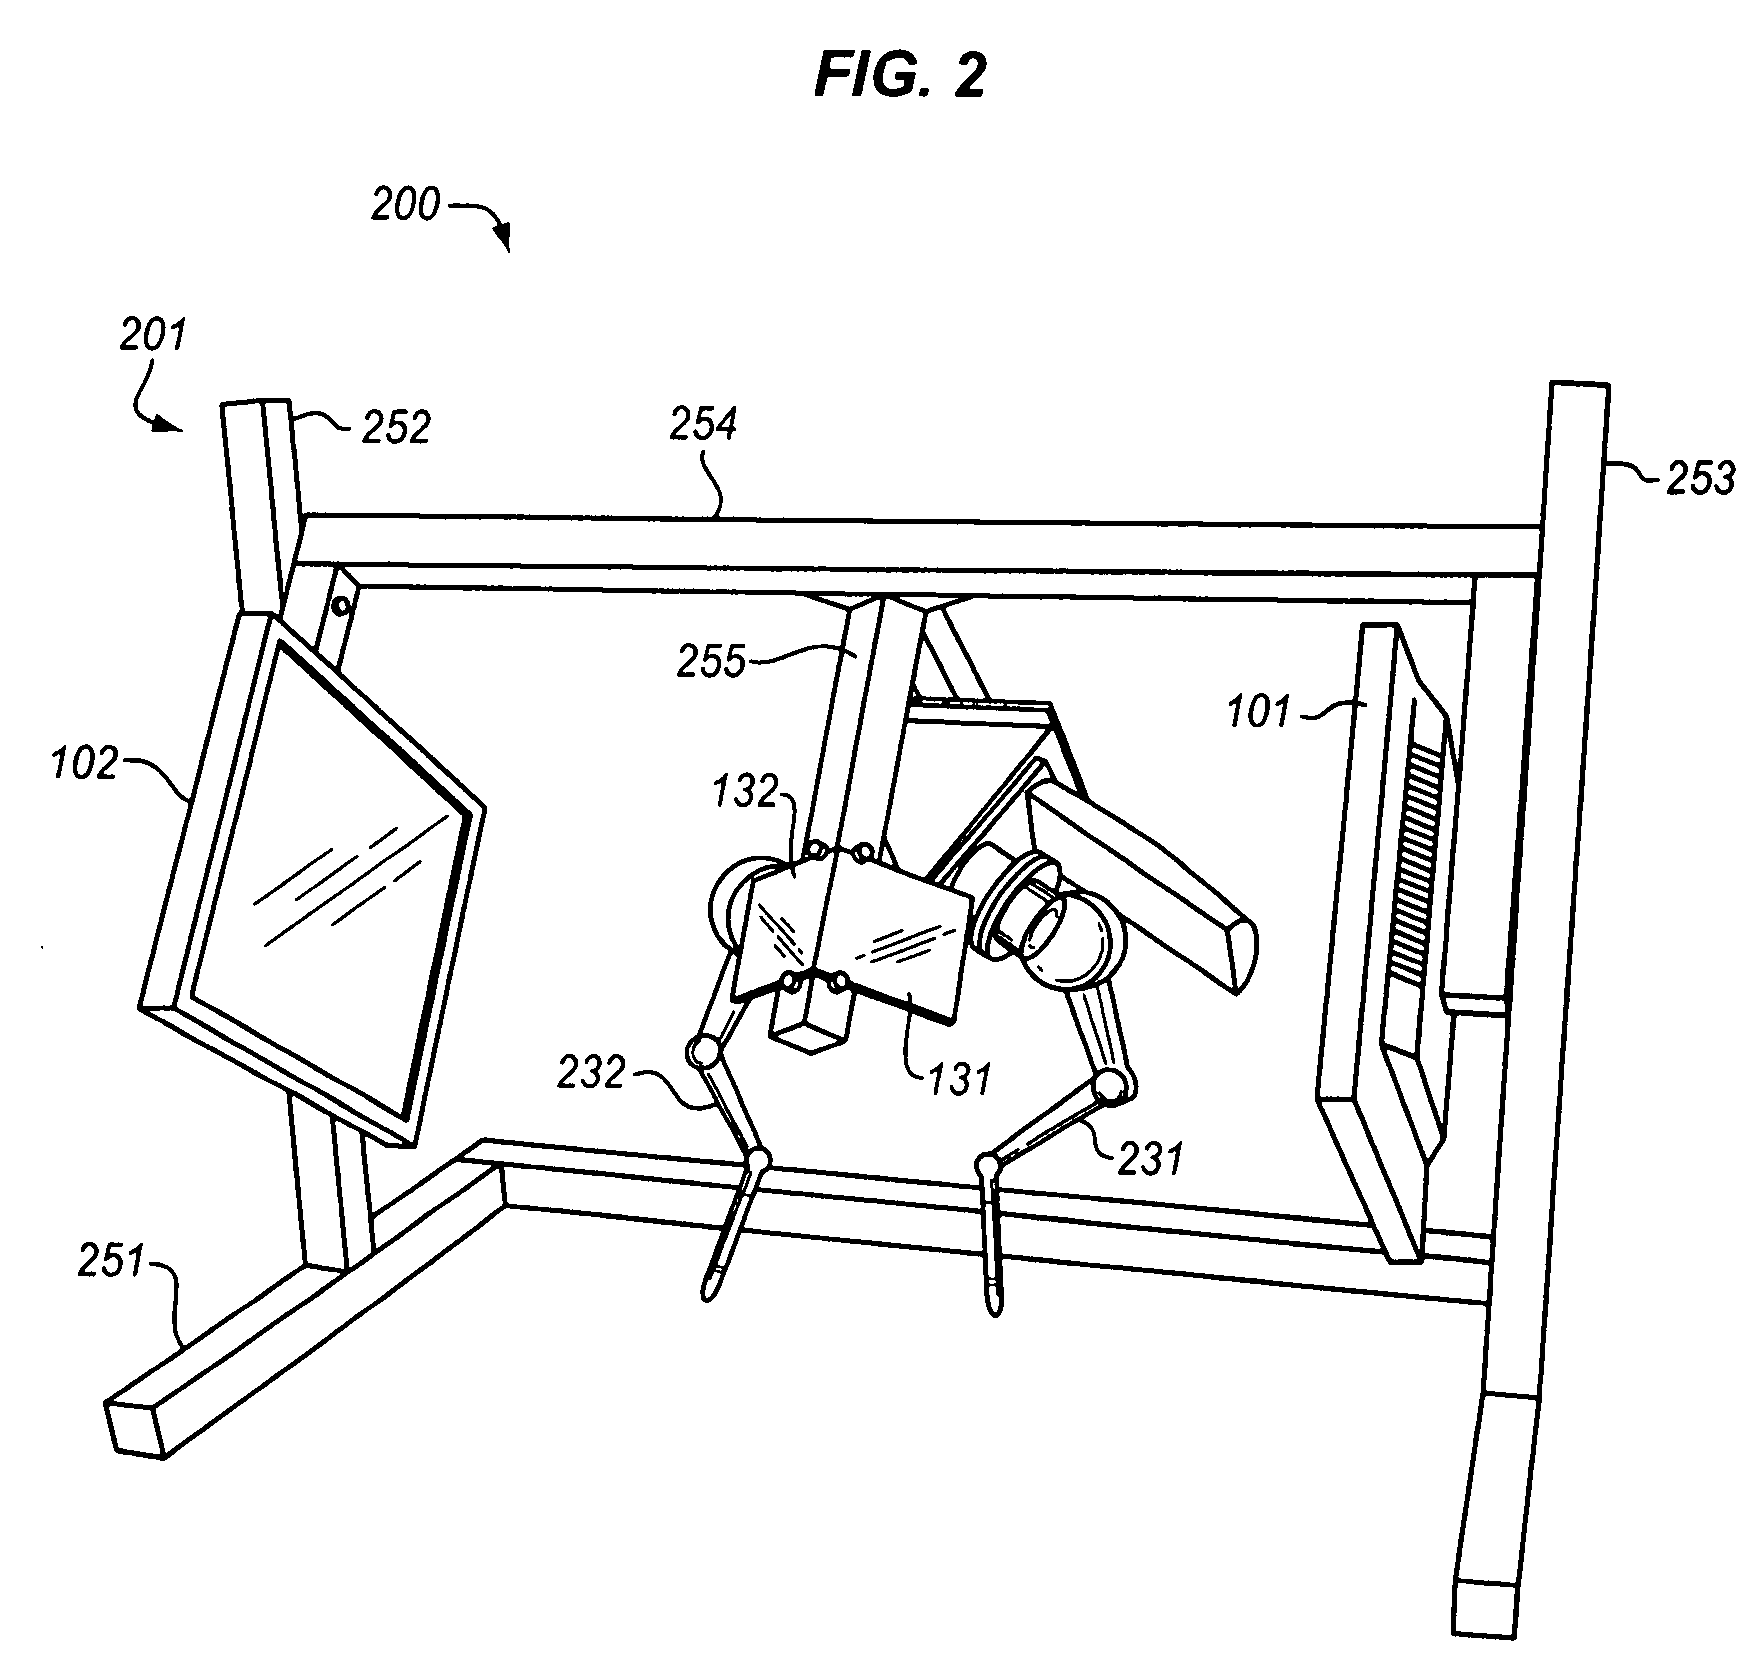 Terminal device for presenting an improved virtual environment to a user